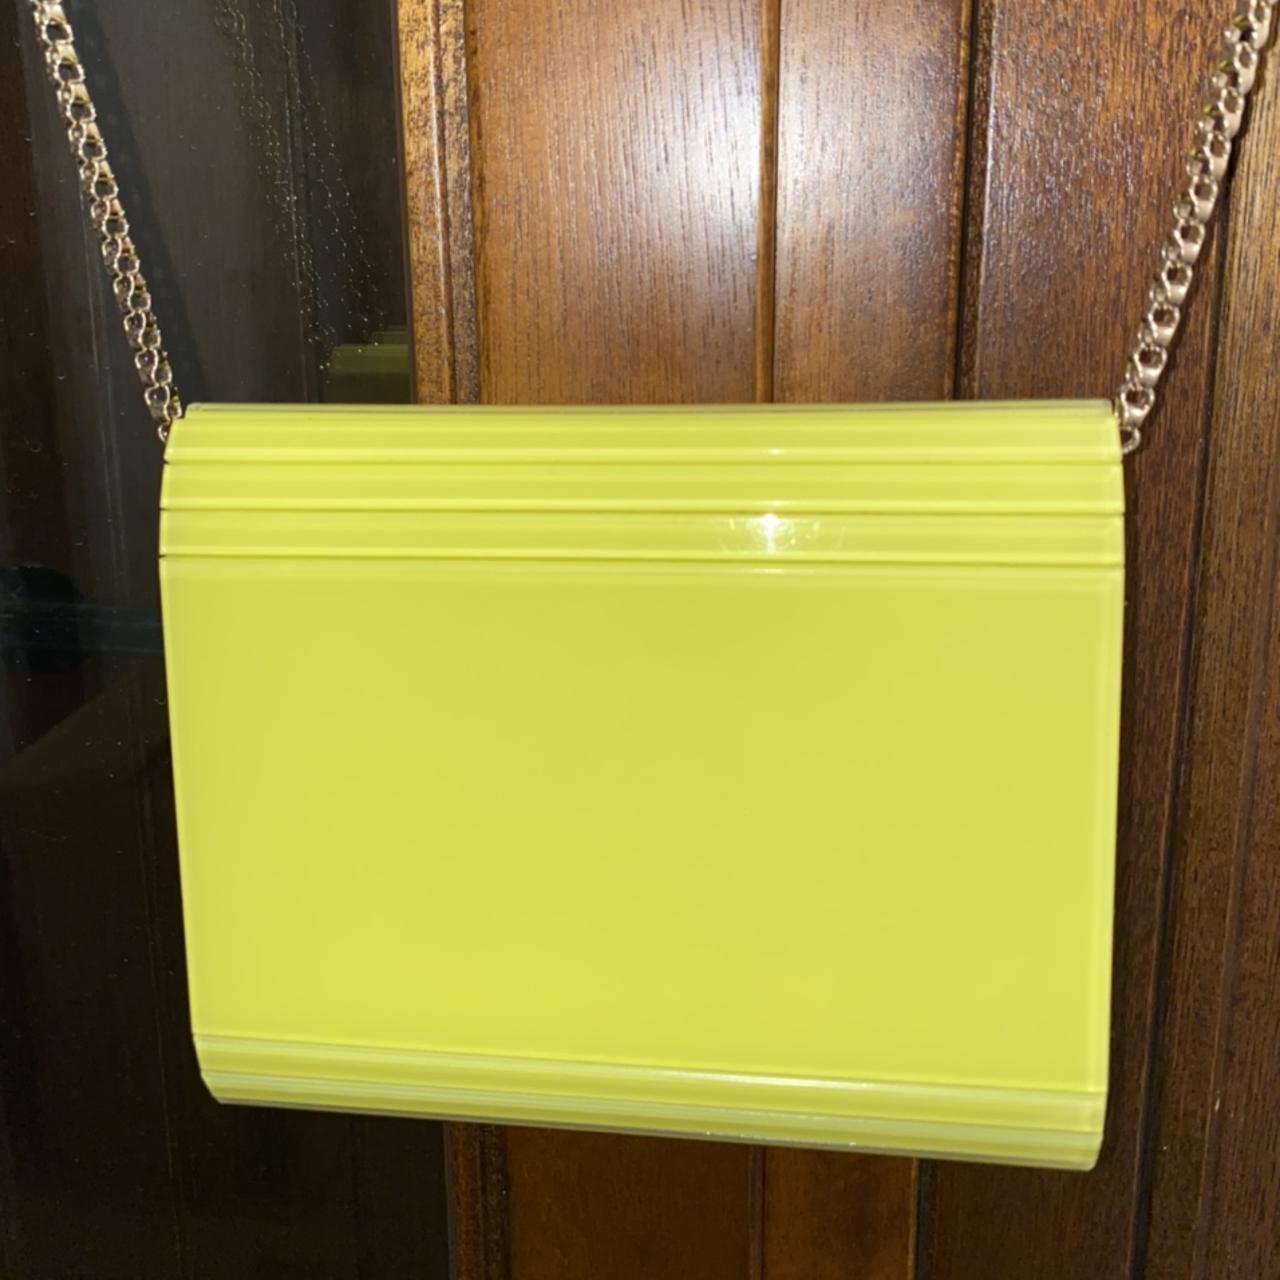 Jimmy Choo candy clutch bag in neon yellow. I used... - Depop